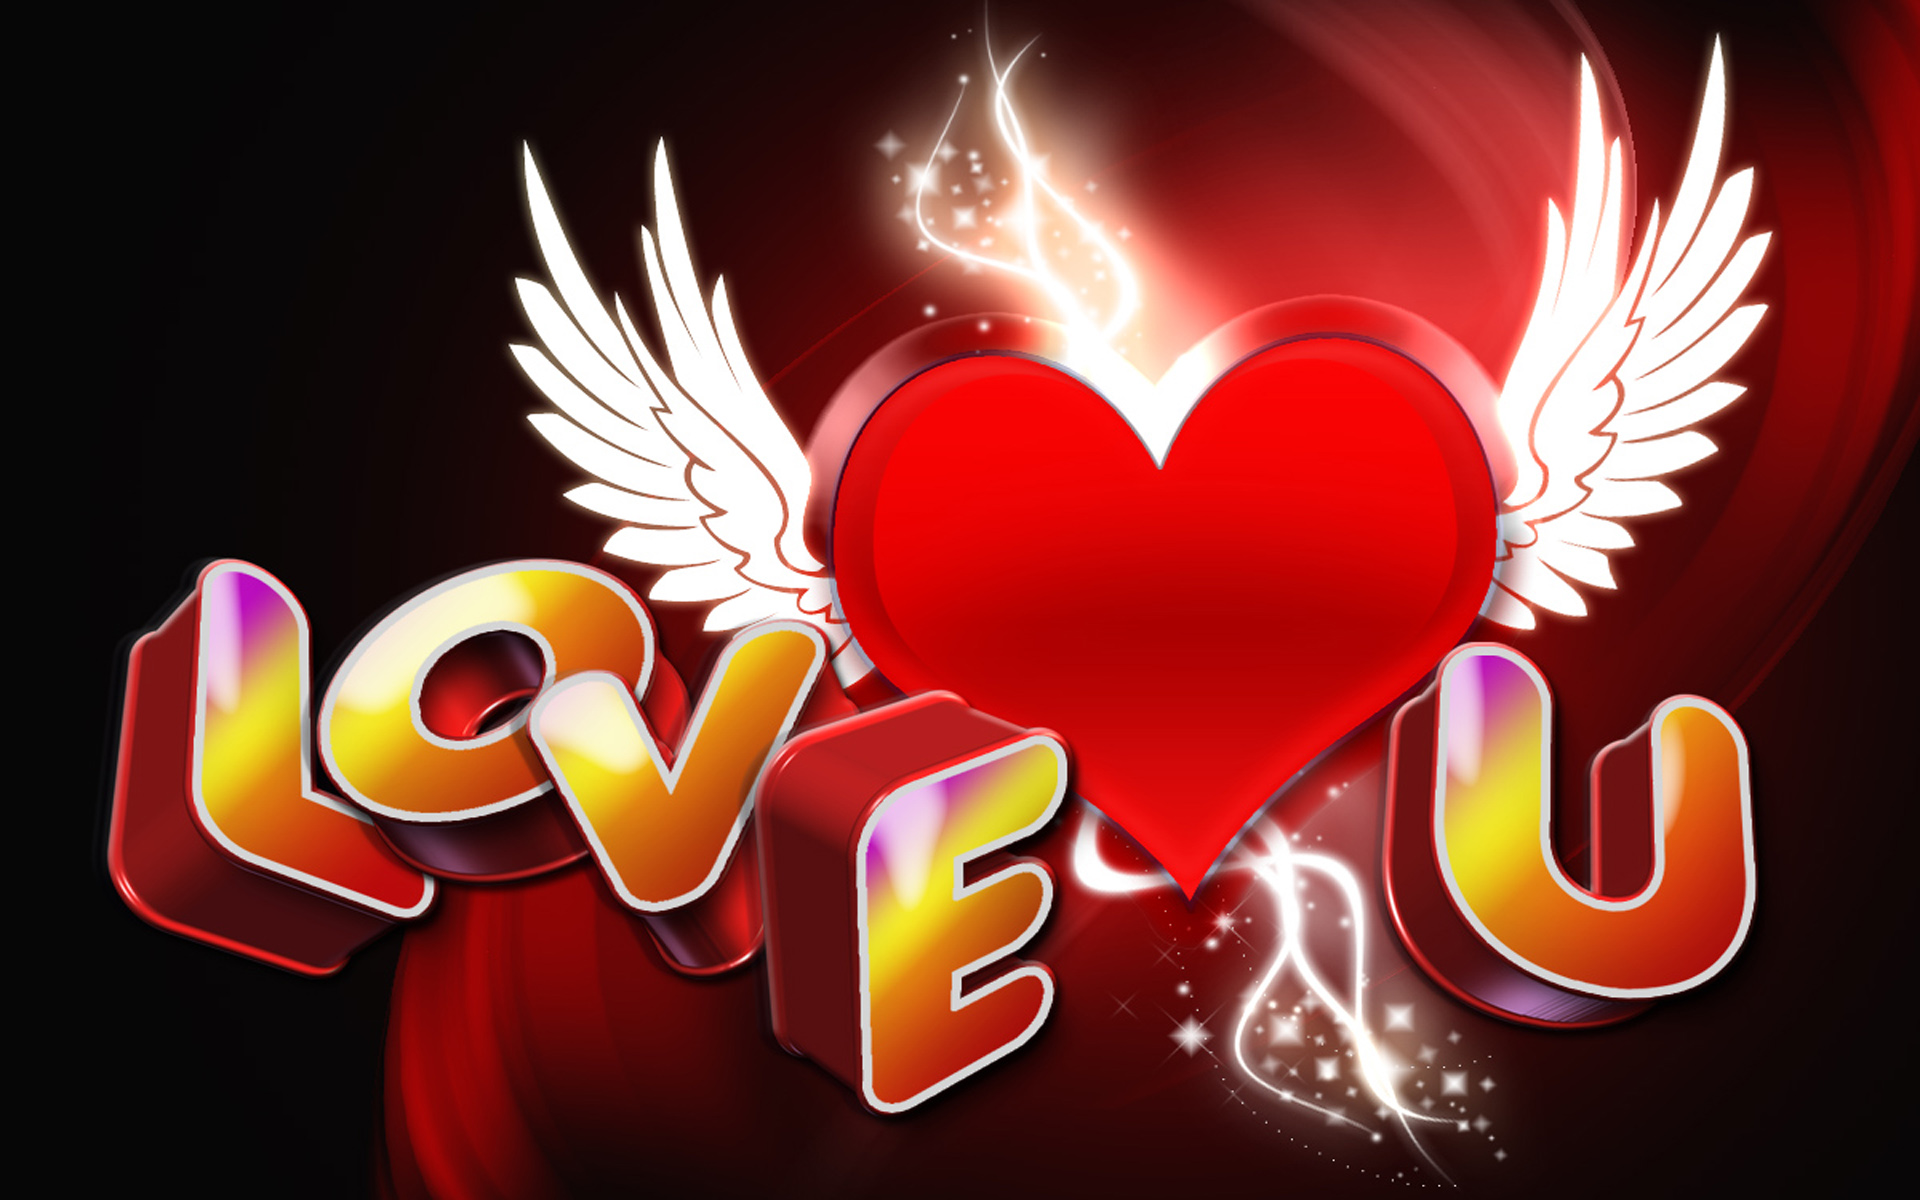 I Love You You Are My Angel Love Red Heart 3d Angel Wings 4k Ultra Hd  Desktop Wallpapers For Computers Laptop Tablet And Mobile Phones :  